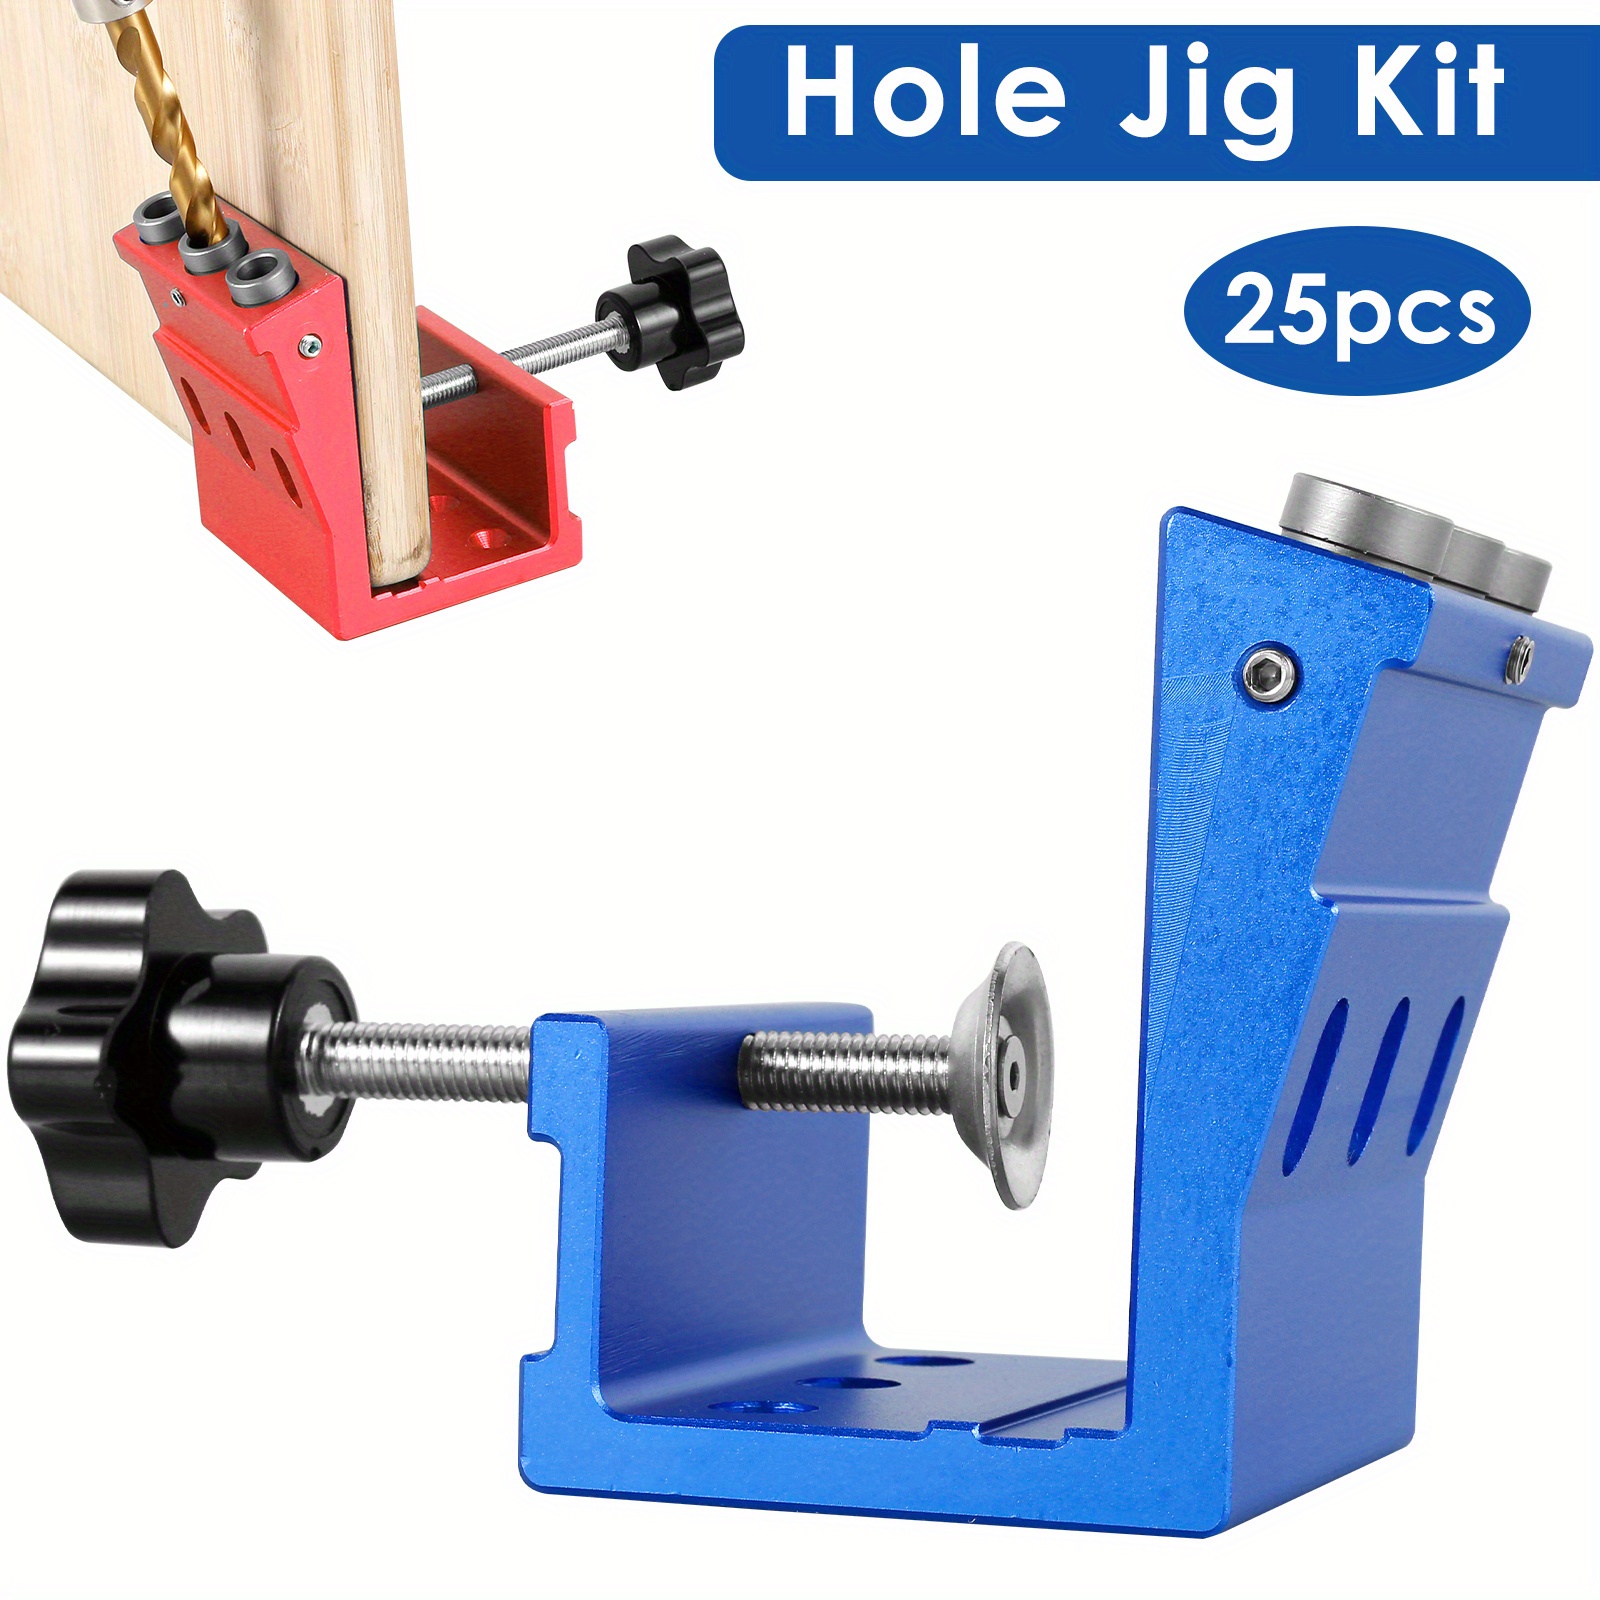 Newruiheng Pocket Hole Jig Tool Kit for Carpentry, Pocket Hole Drill Guide  Jig Set for 15° Angled Holes, Portable Wood Pocket Hole Screw Clamp System